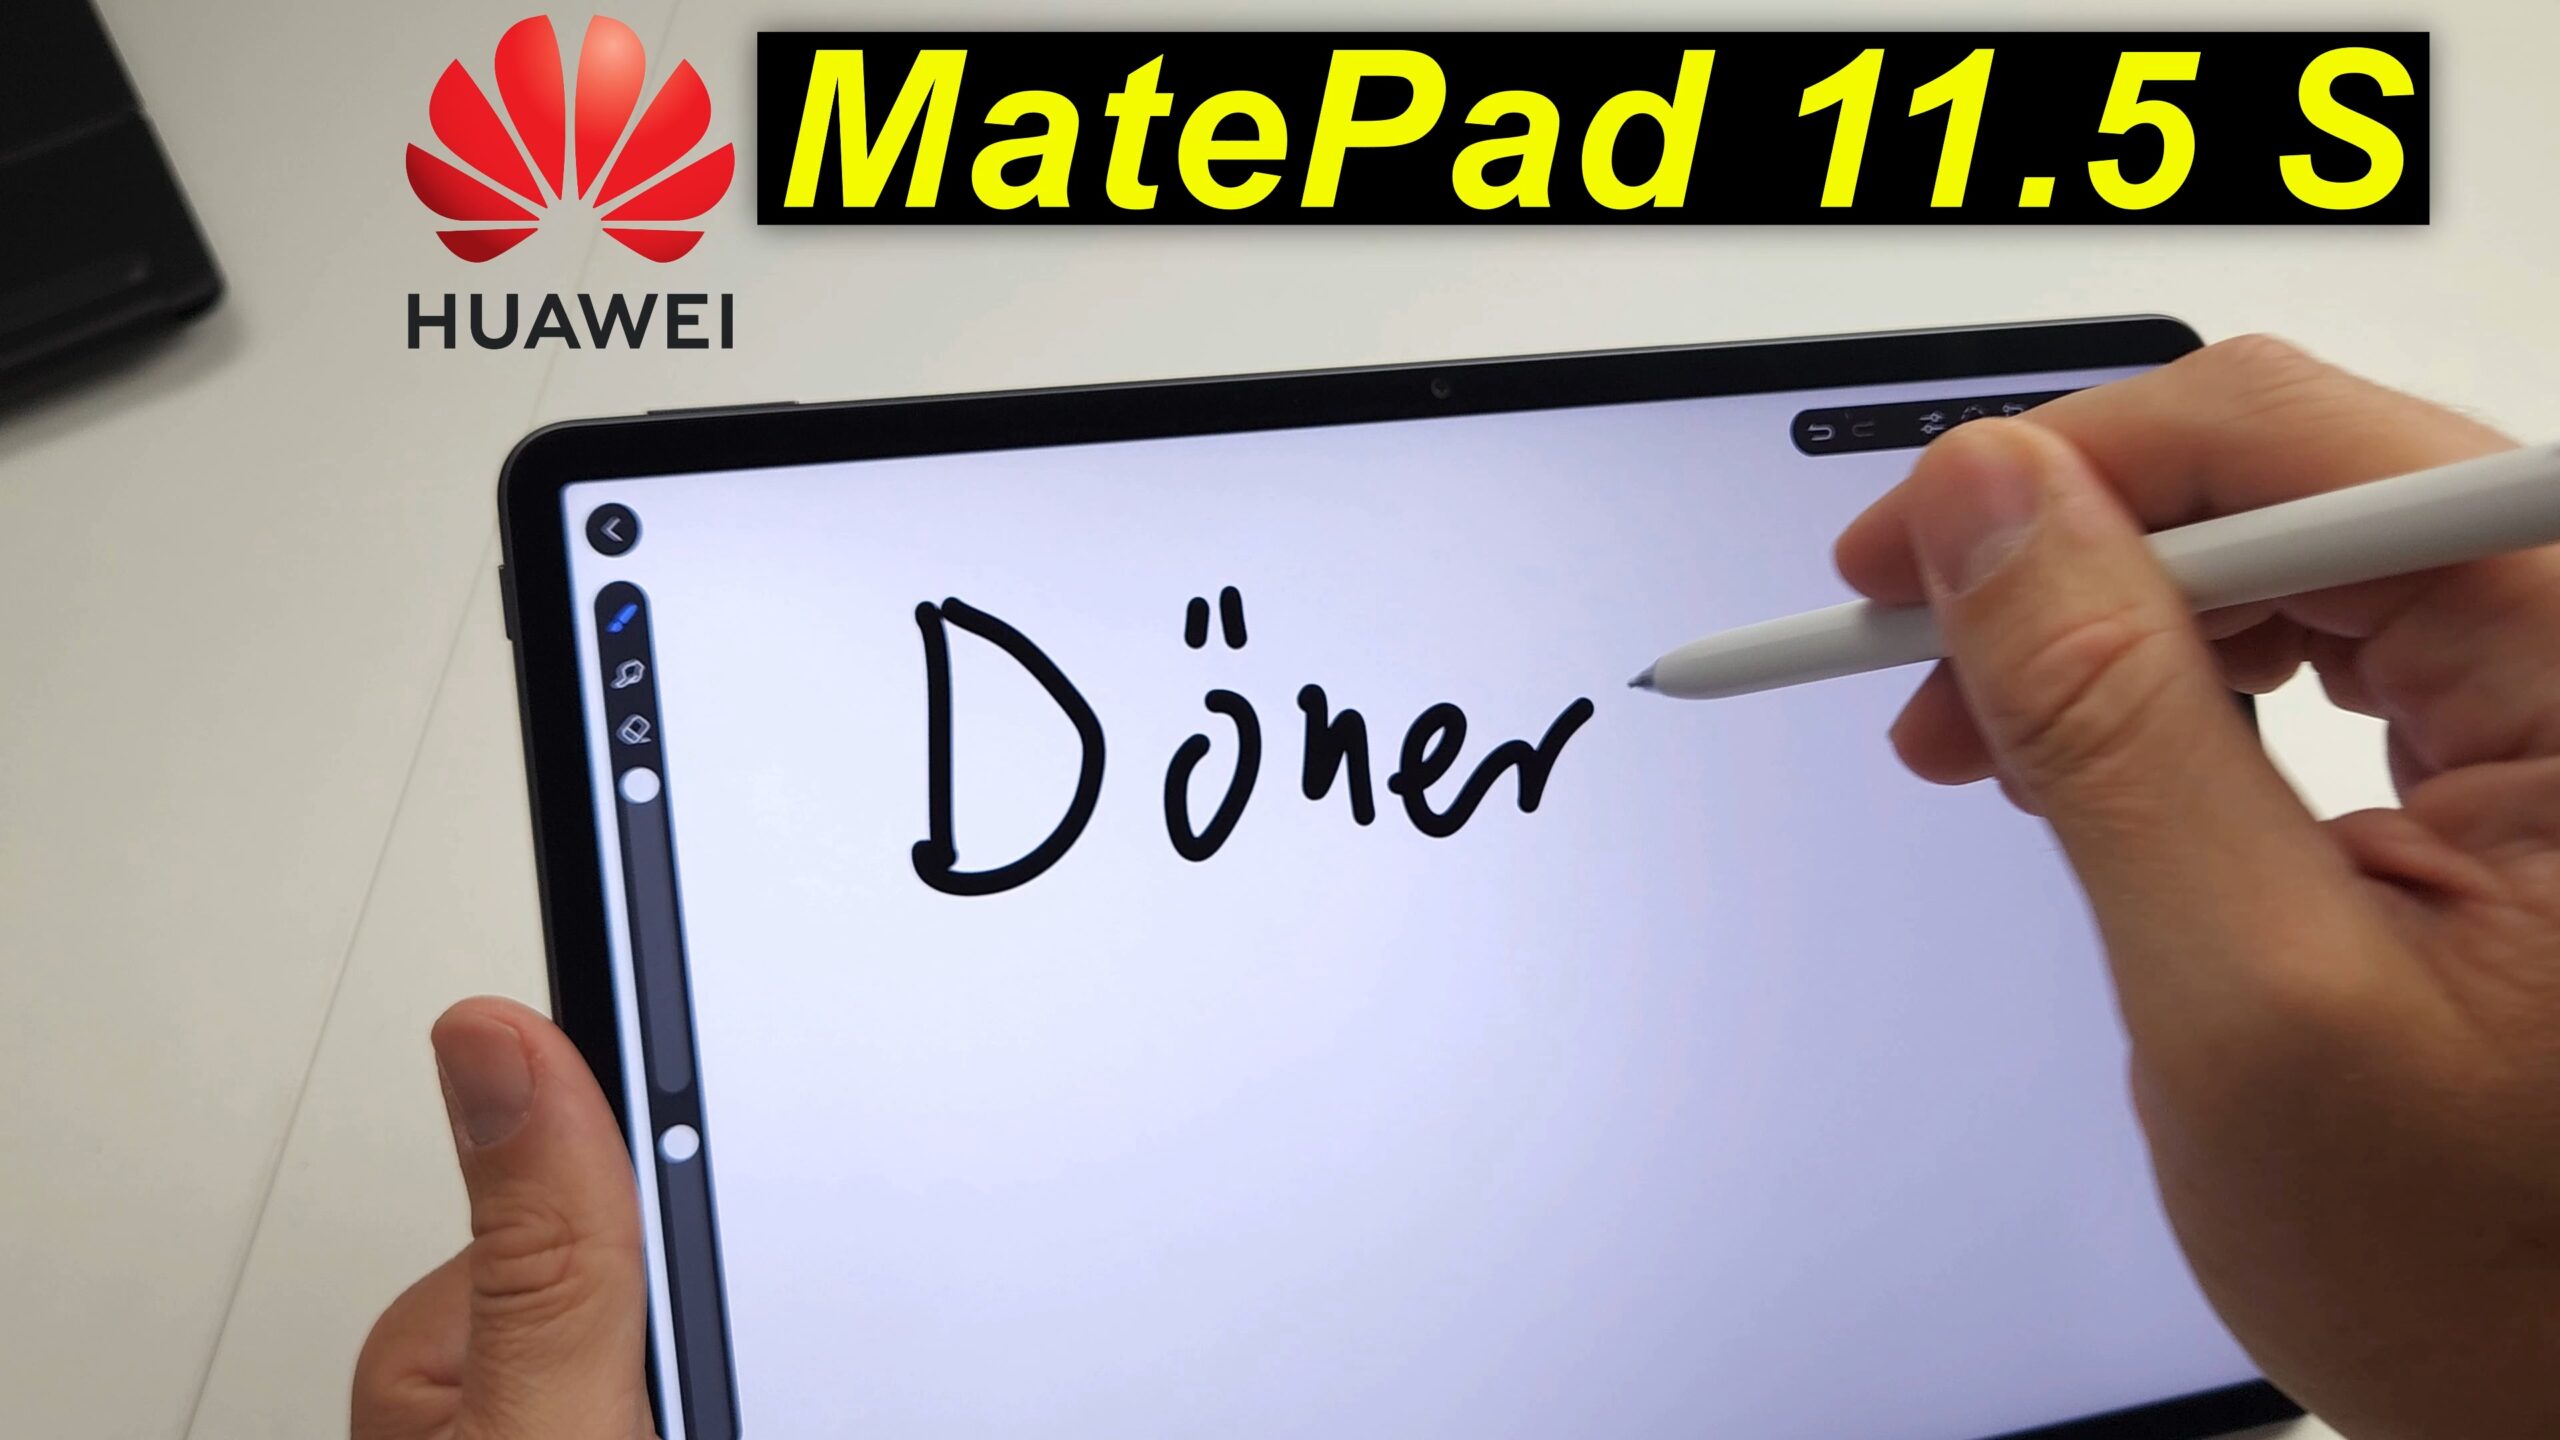 Huawei MatePad 11.5 S - Hands-On PaperMatte Edition